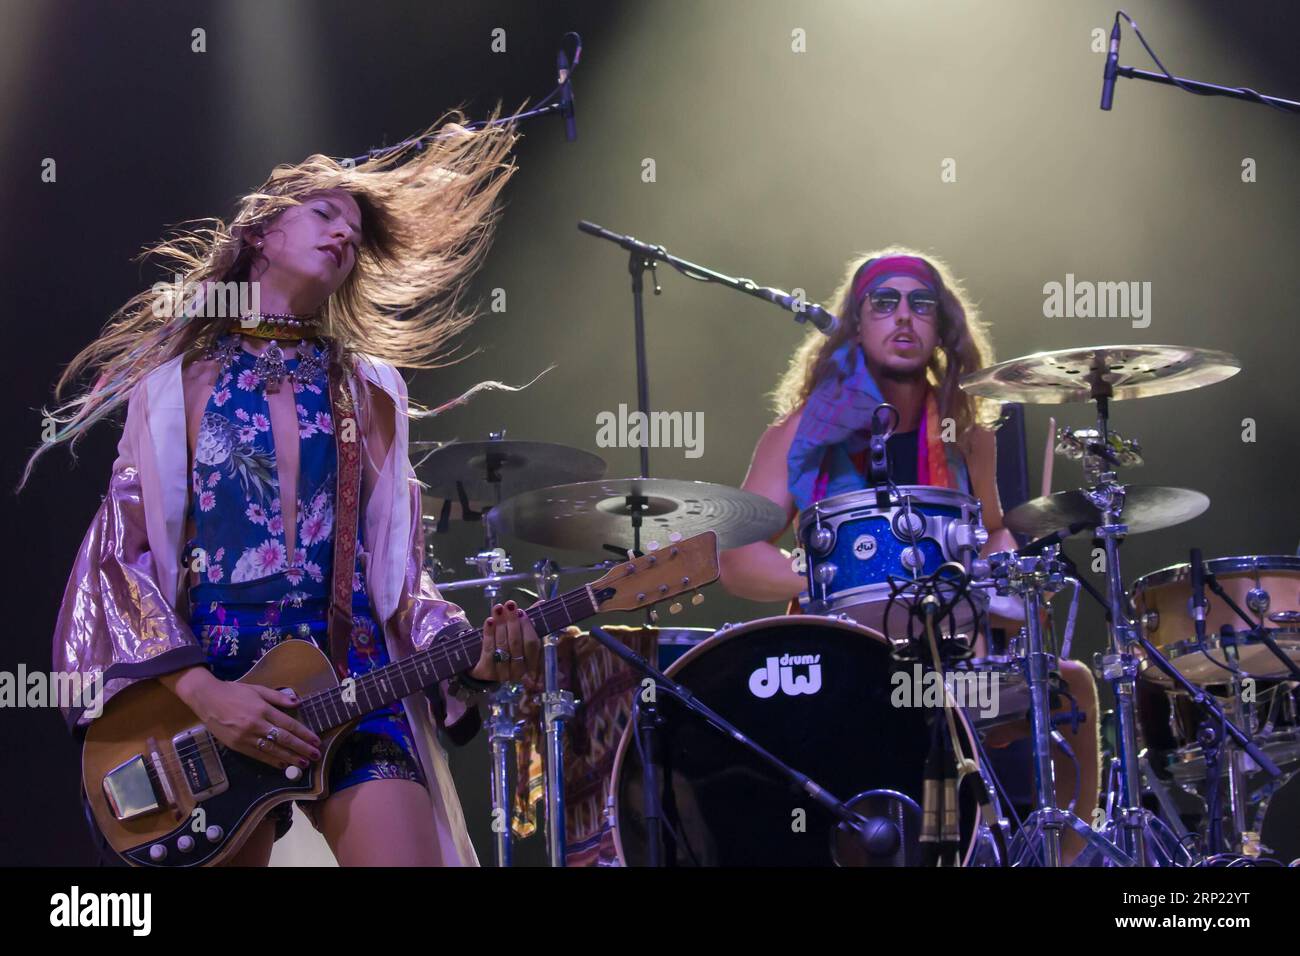 (180814) -- BUDAPEST, Aug. 14, 2018 -- Vocalist Cato van Dijck (L) and her brother drummer Joost van Dijck perform with their Dutch-New Zealand band My Baby at their concert on the A38 Stage at the Sziget Festival held in Budapest, Hungary on Aug. 13, 2018. ) (gj) HUNGARY-BUDAPEST-SZIGET FESTIVAL AttilaxVolgyi PUBLICATIONxNOTxINxCHN Stock Photo